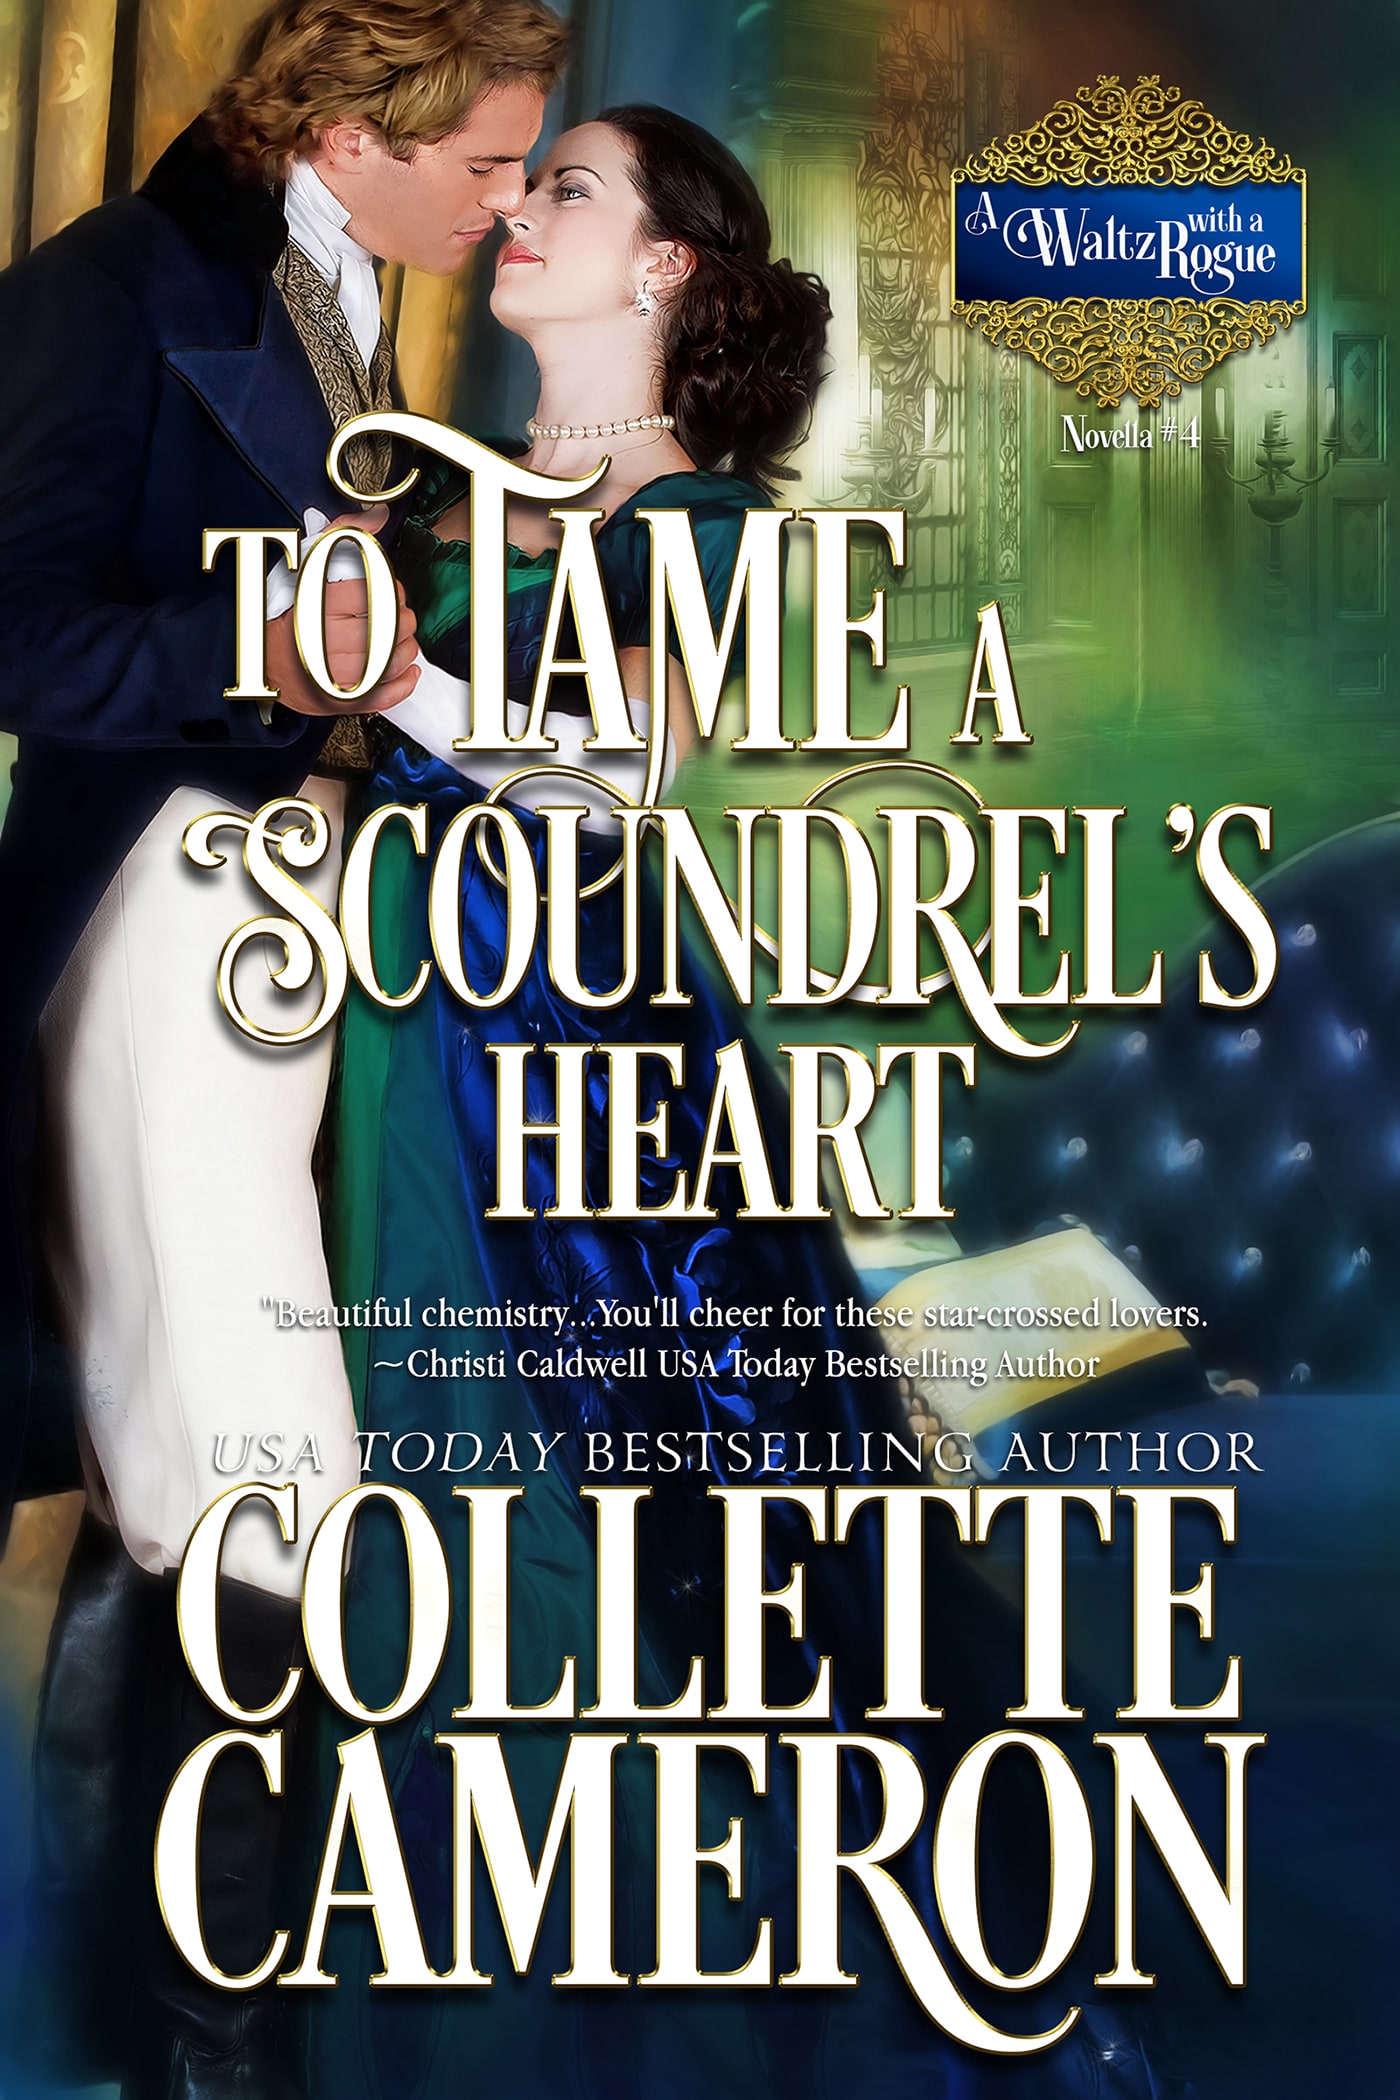 To Tame a Scoundrel's Heart Sale! Only 99¢, A Waltz with a Rogue Series, Collette Cameron historical romances, Regency romance ebooks